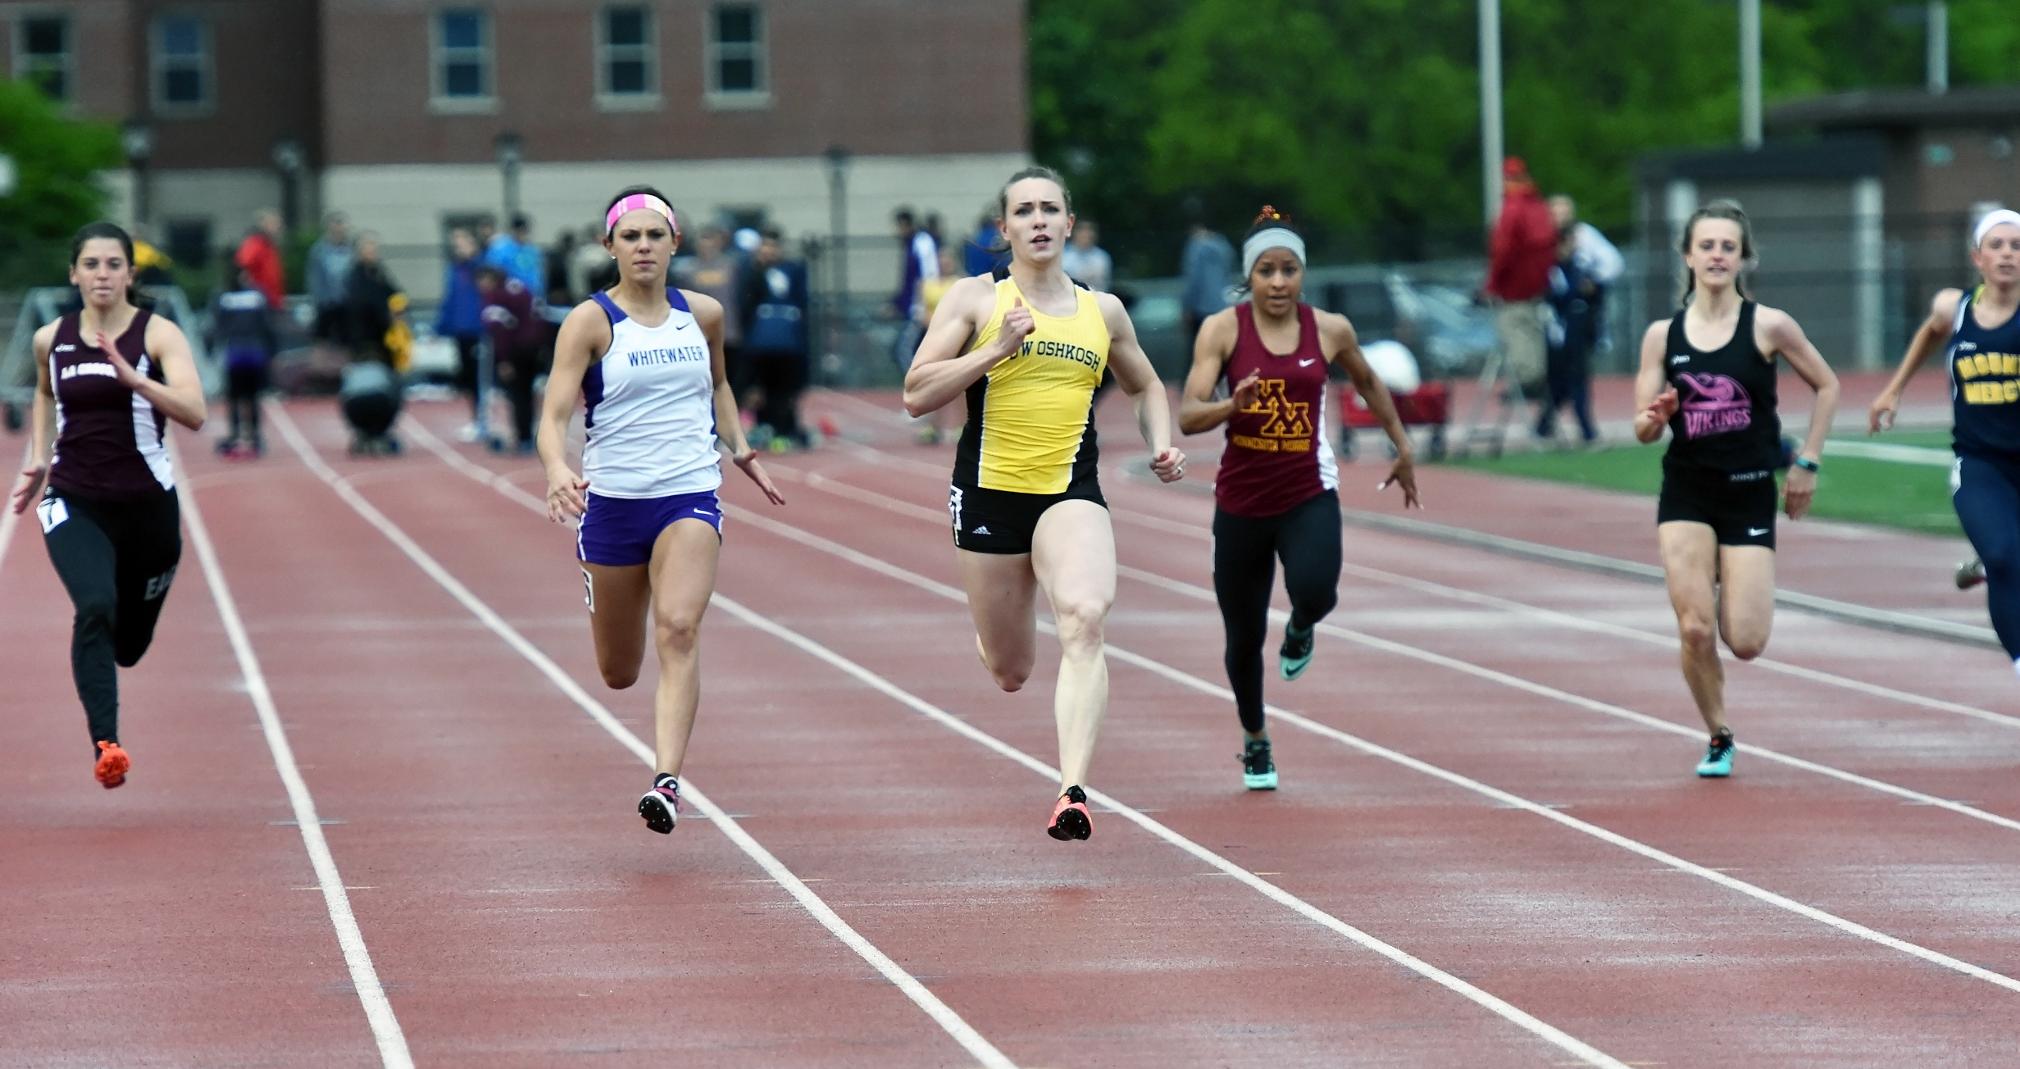 Becklyn Hunter won the 200-meter dash at the UW-La Crosse Invitational with a time of 24.23 seconds.